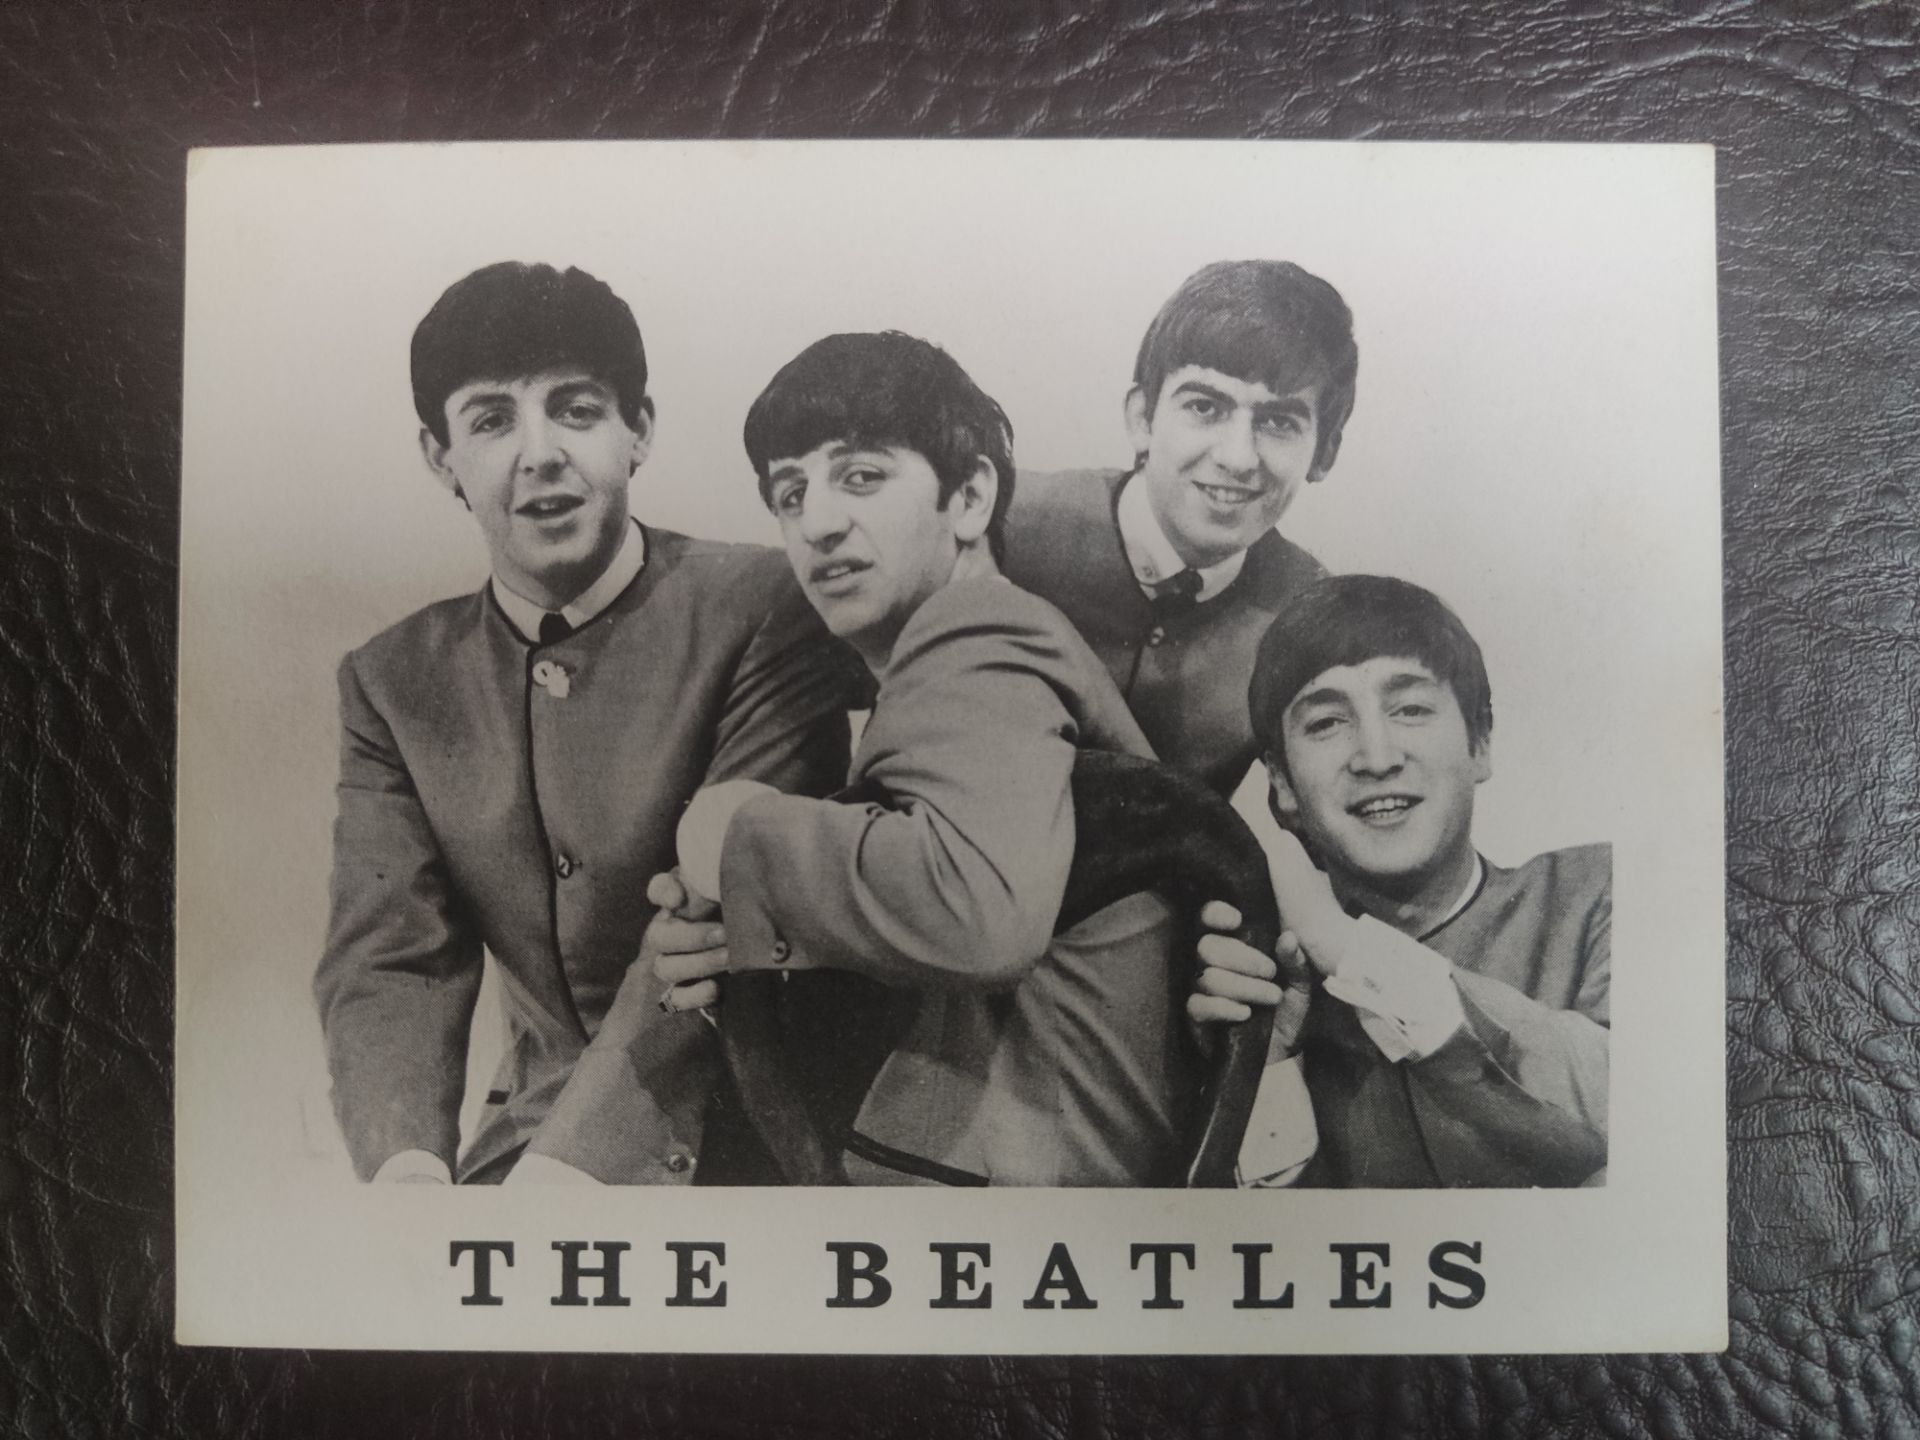 The Beatles Official Fan Club Photo Card With The Beatles Autographs - John, Paul, George and Rin... - Image 2 of 6